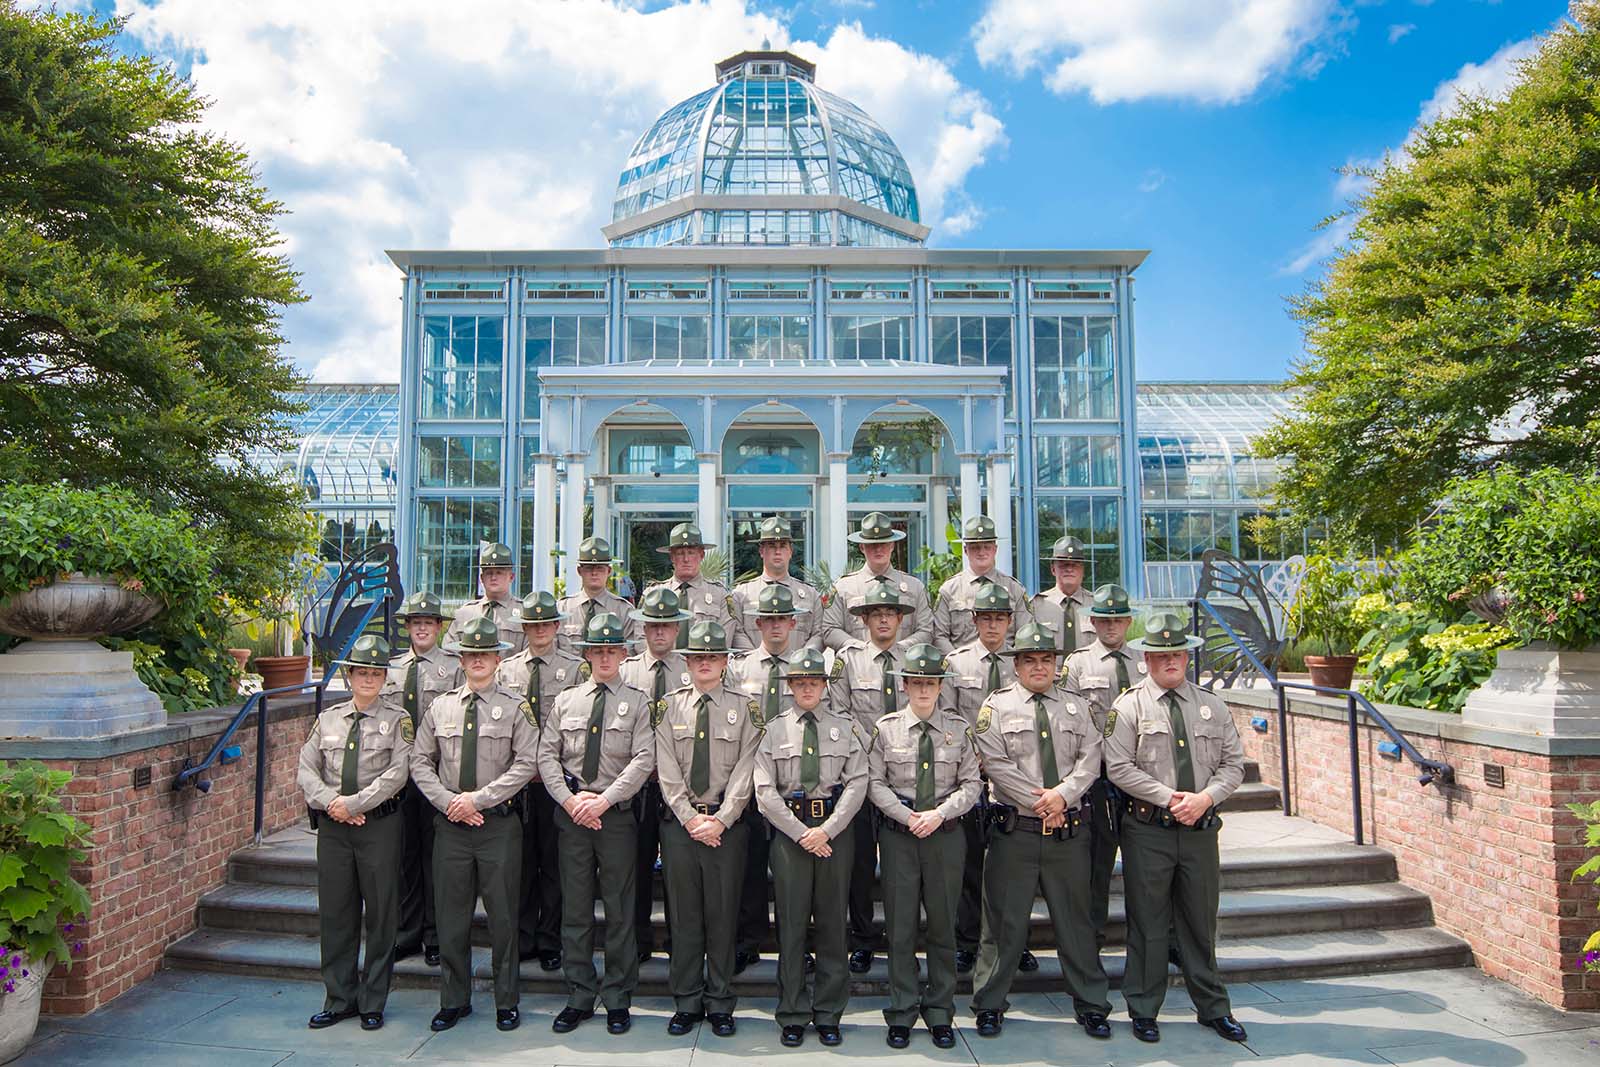 A group photo of Conservation Police recruit graduates